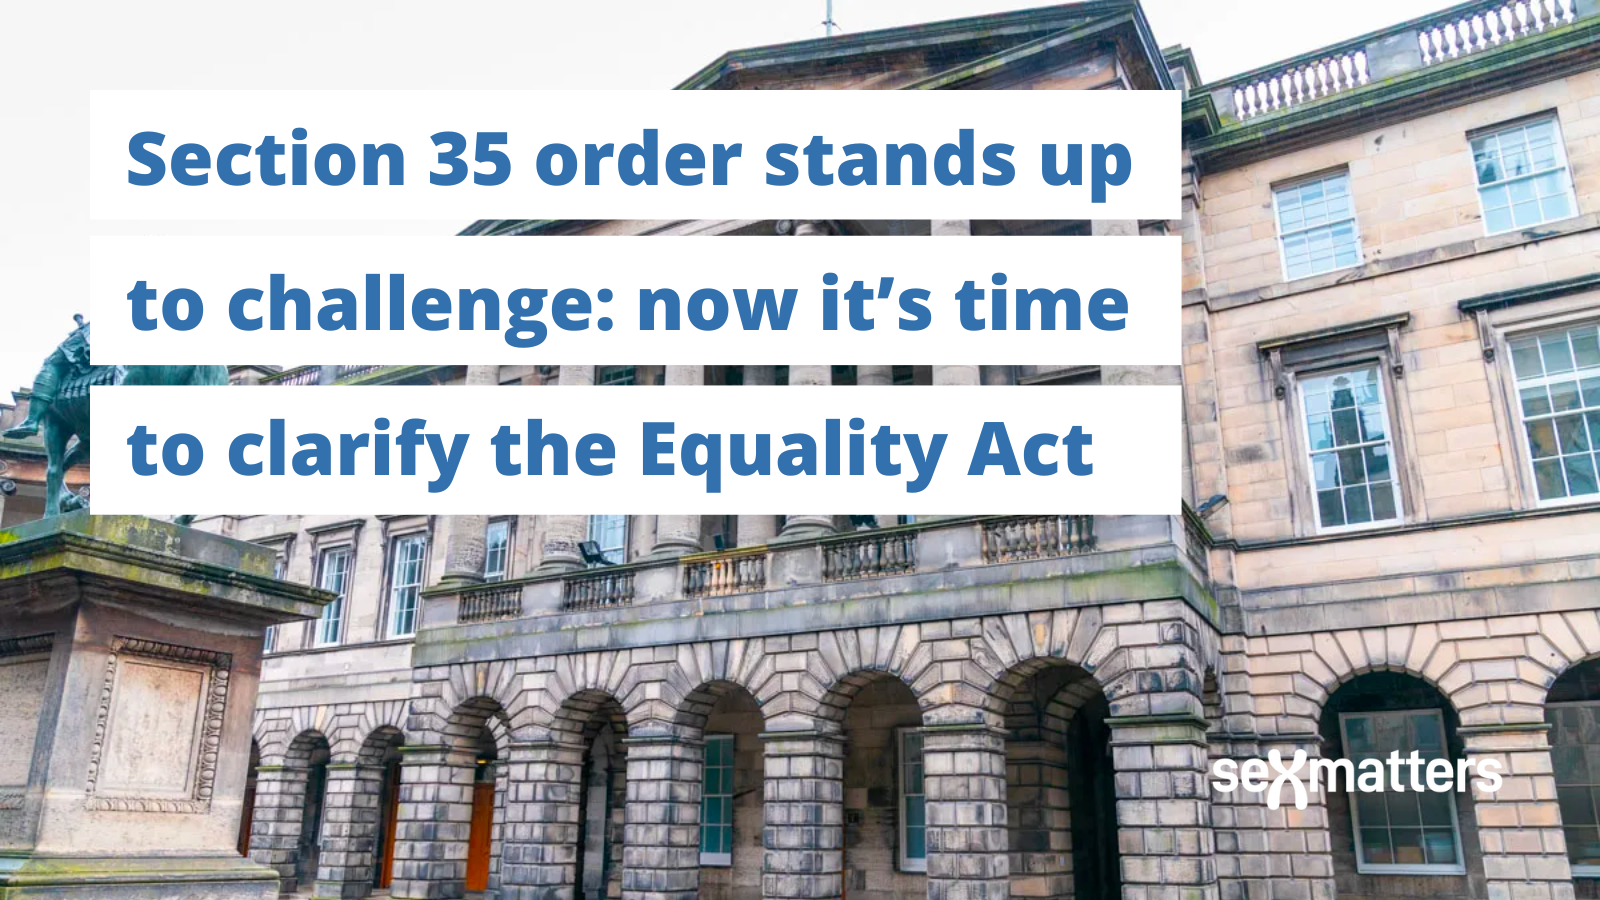 Section 35 order stands up to challenge: now it’s time to clarify the Equality Act